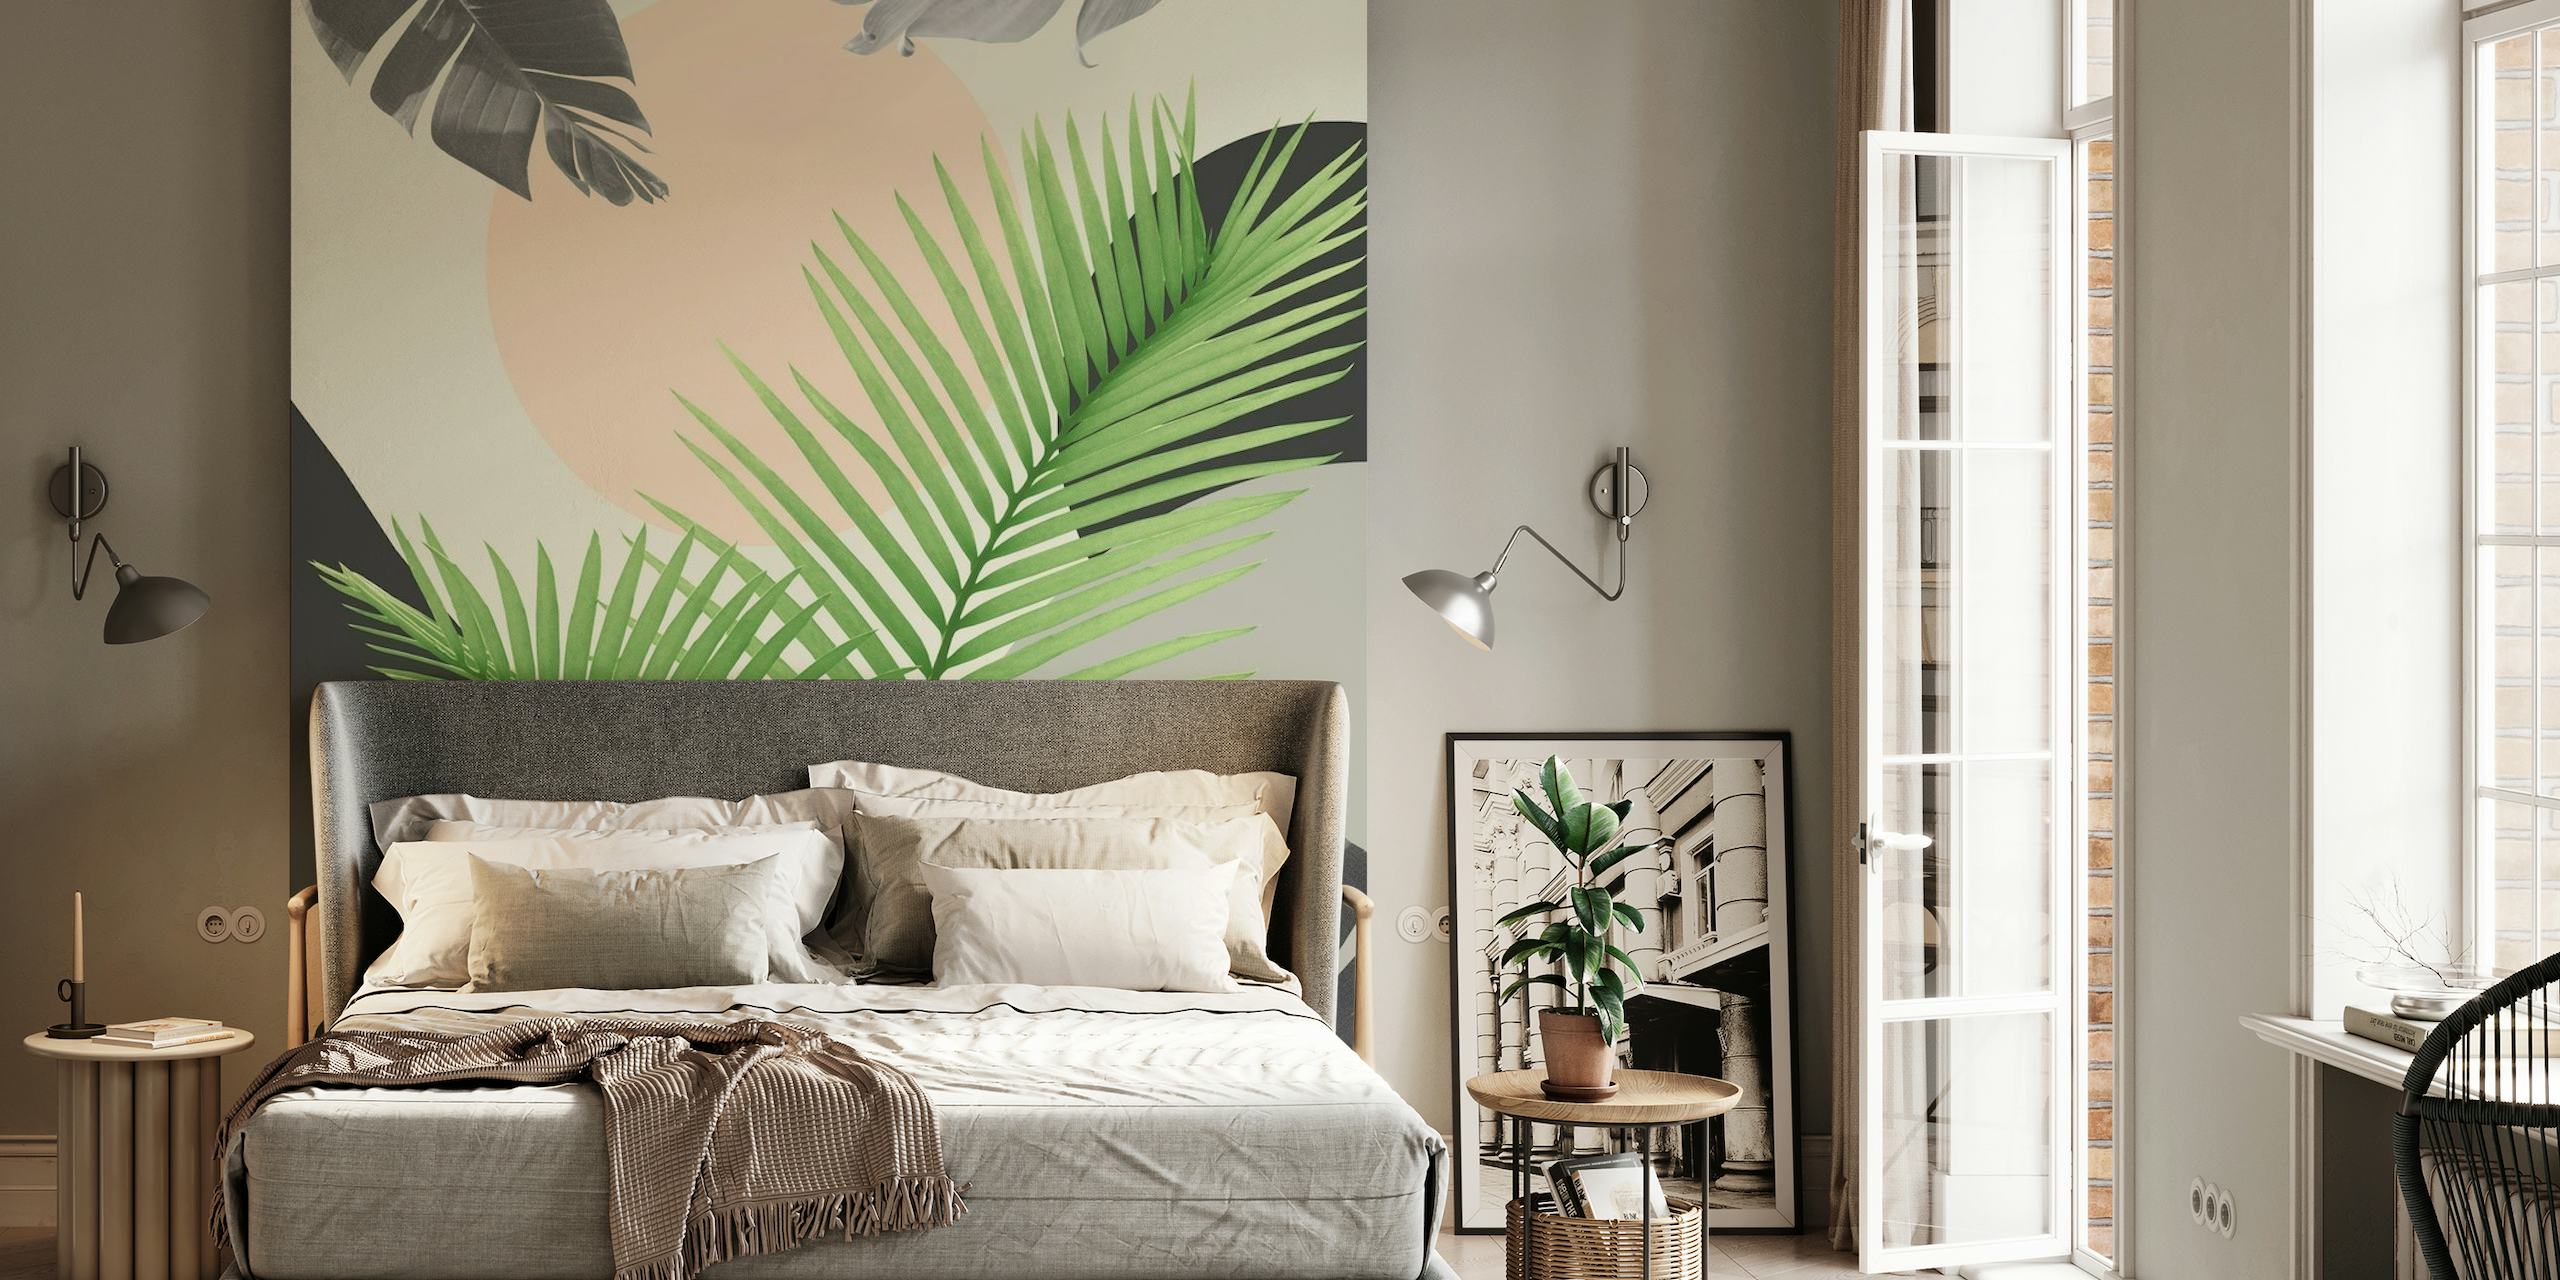 Intertwined Palm Leaves wall mural in shades of green and black